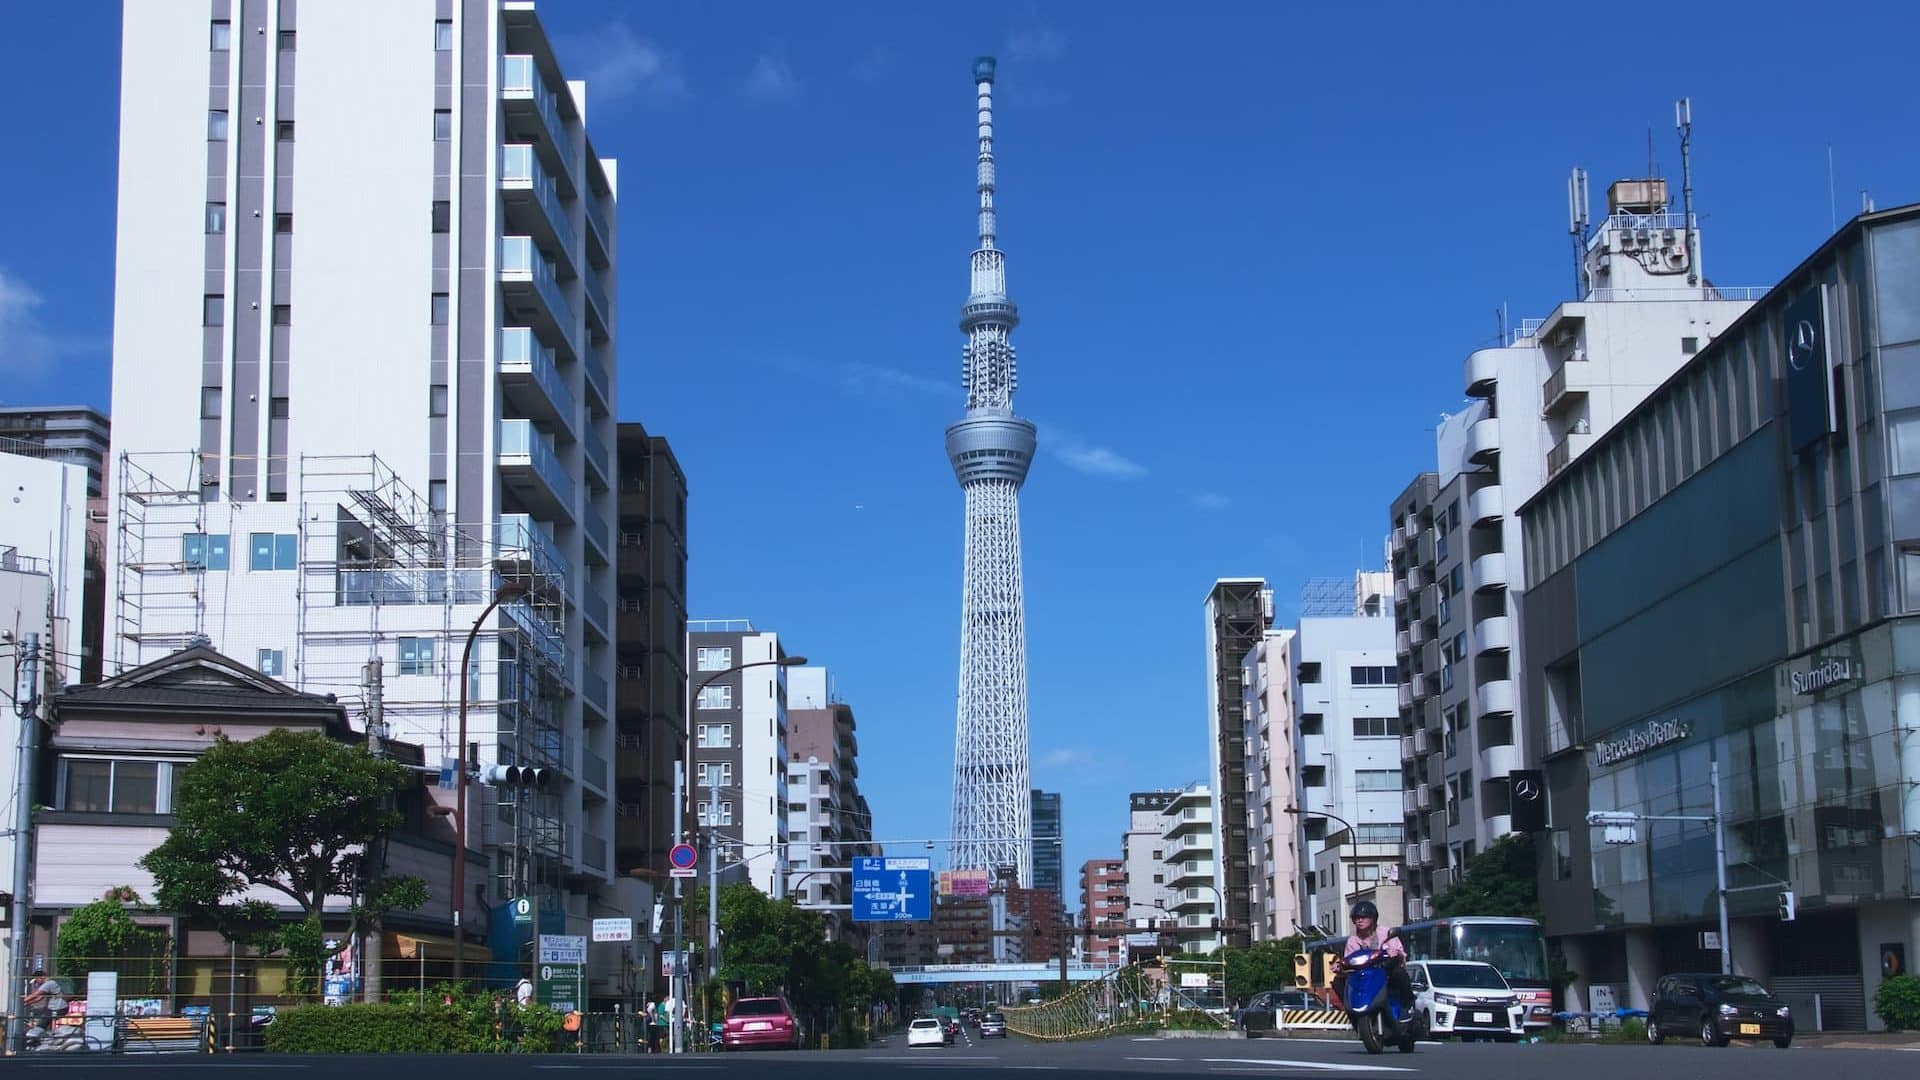 Tokyo Skytree is the most famous attraction in Sumida City